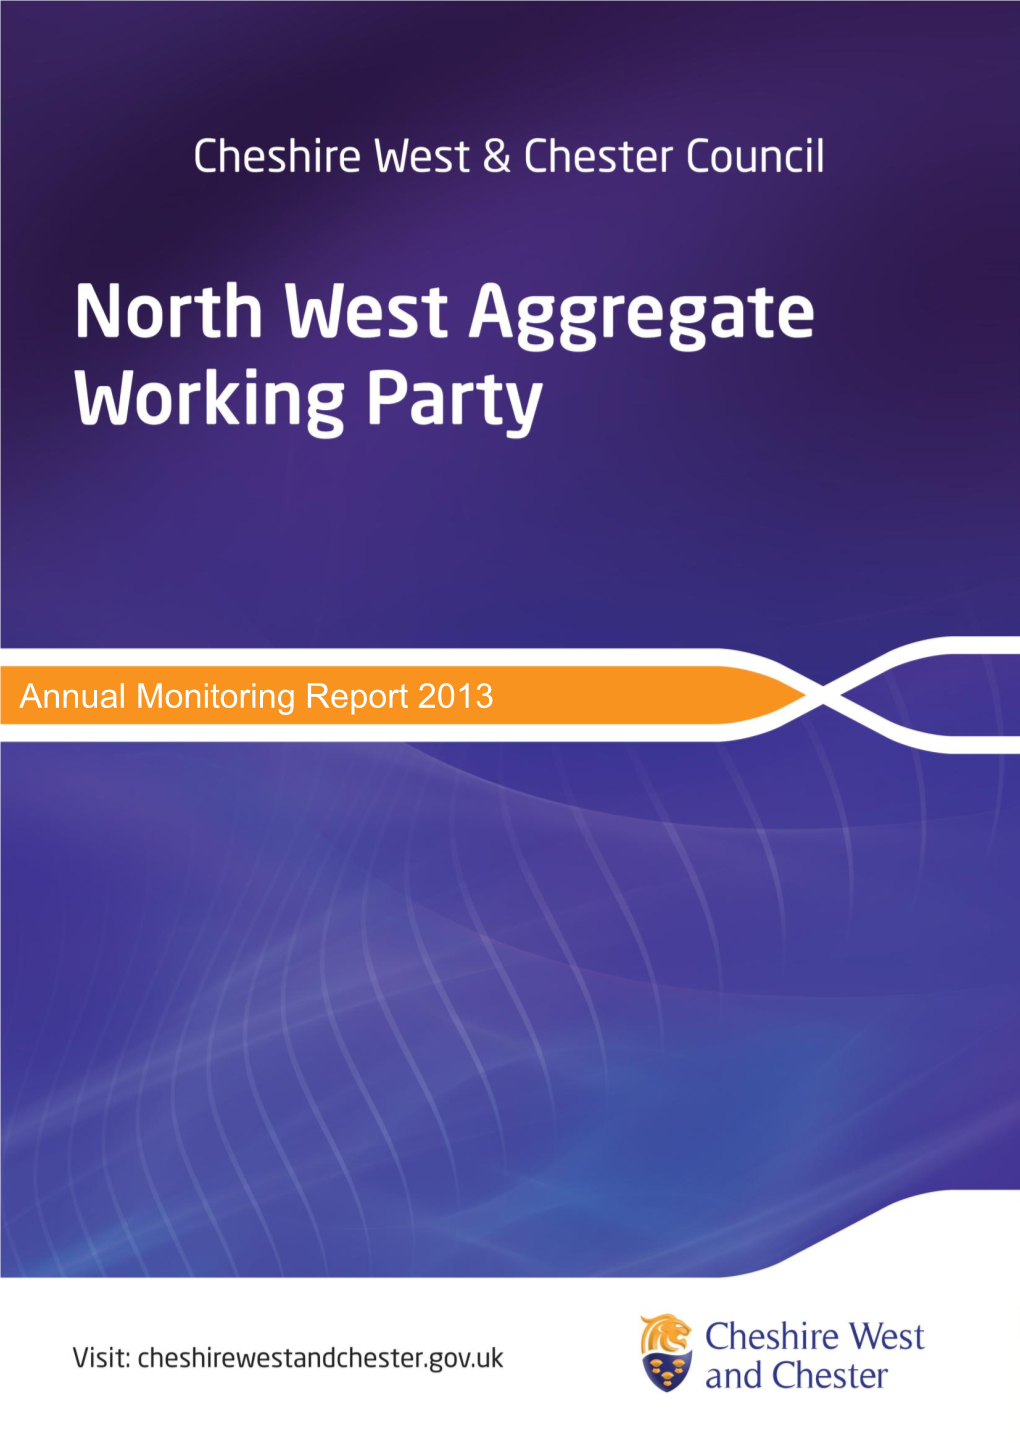 North West Aggregate Working Party (NWAWP) Is One of Nine Similar Working Parties Throughout